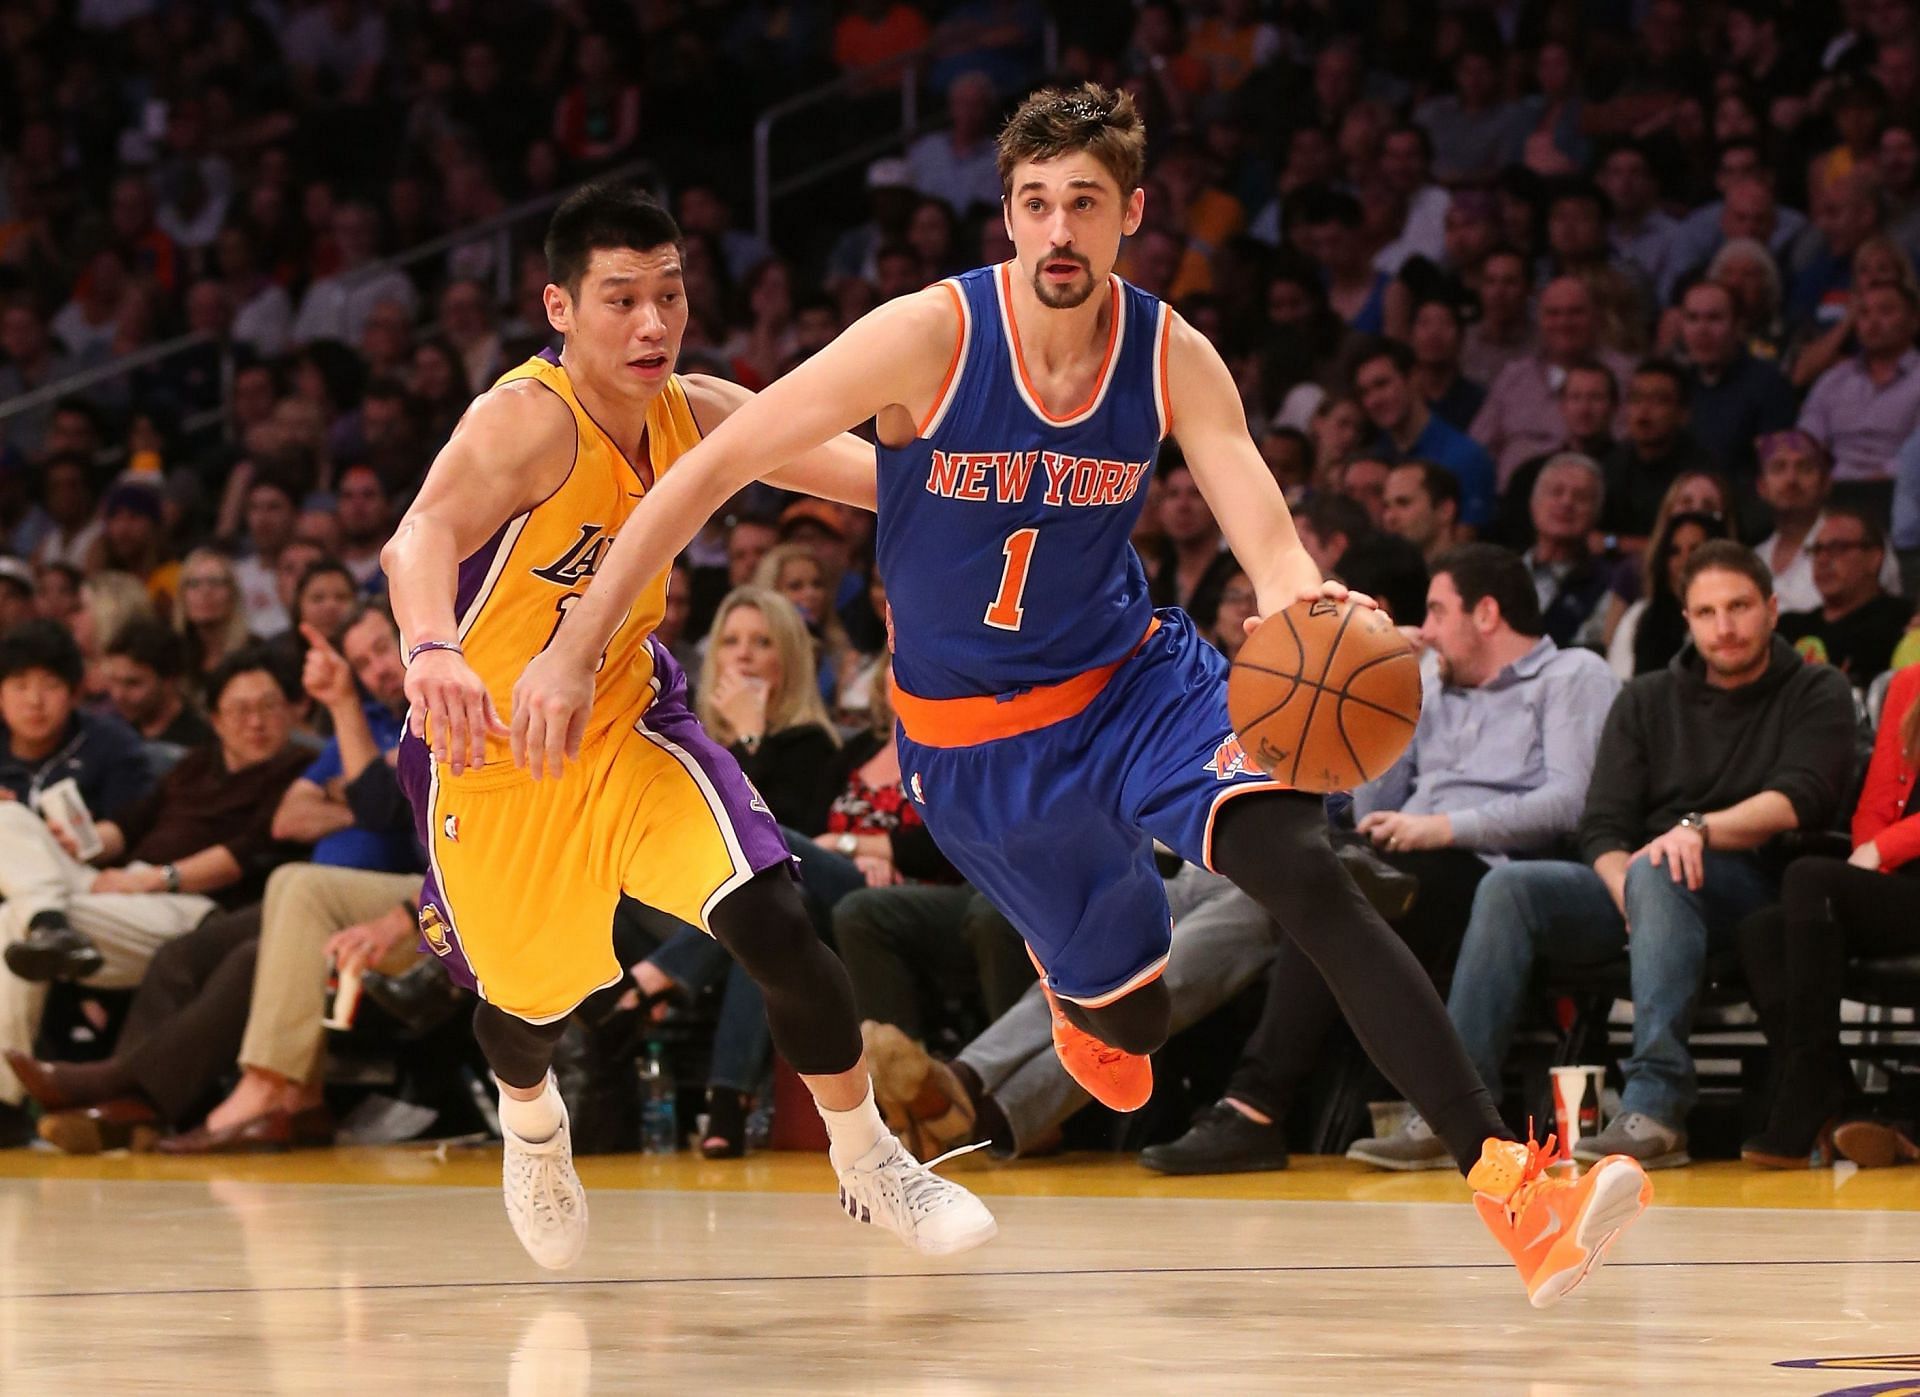 Alexey Shved playing for the New York Knicks against the LA Lakers.